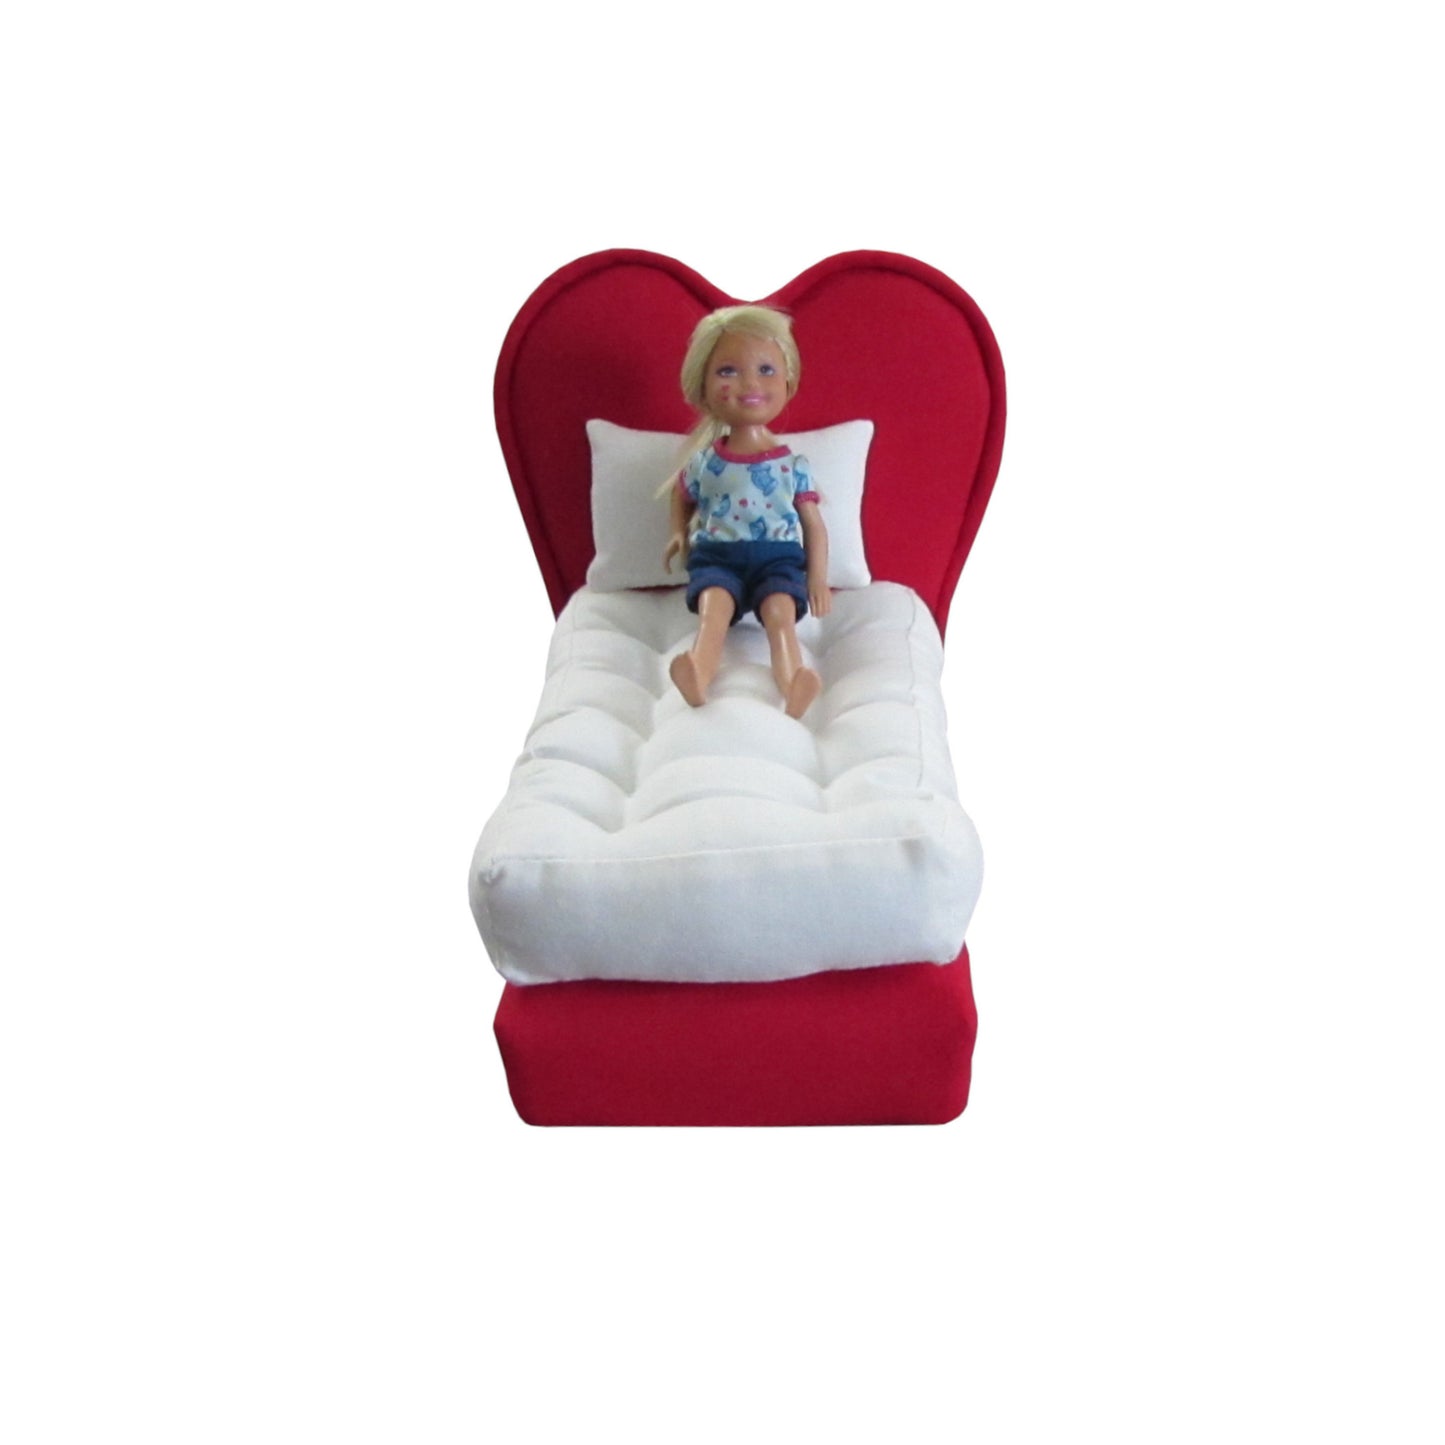 Upholstered Red Heart Doll Bed for 6.5-inch dolls with doll